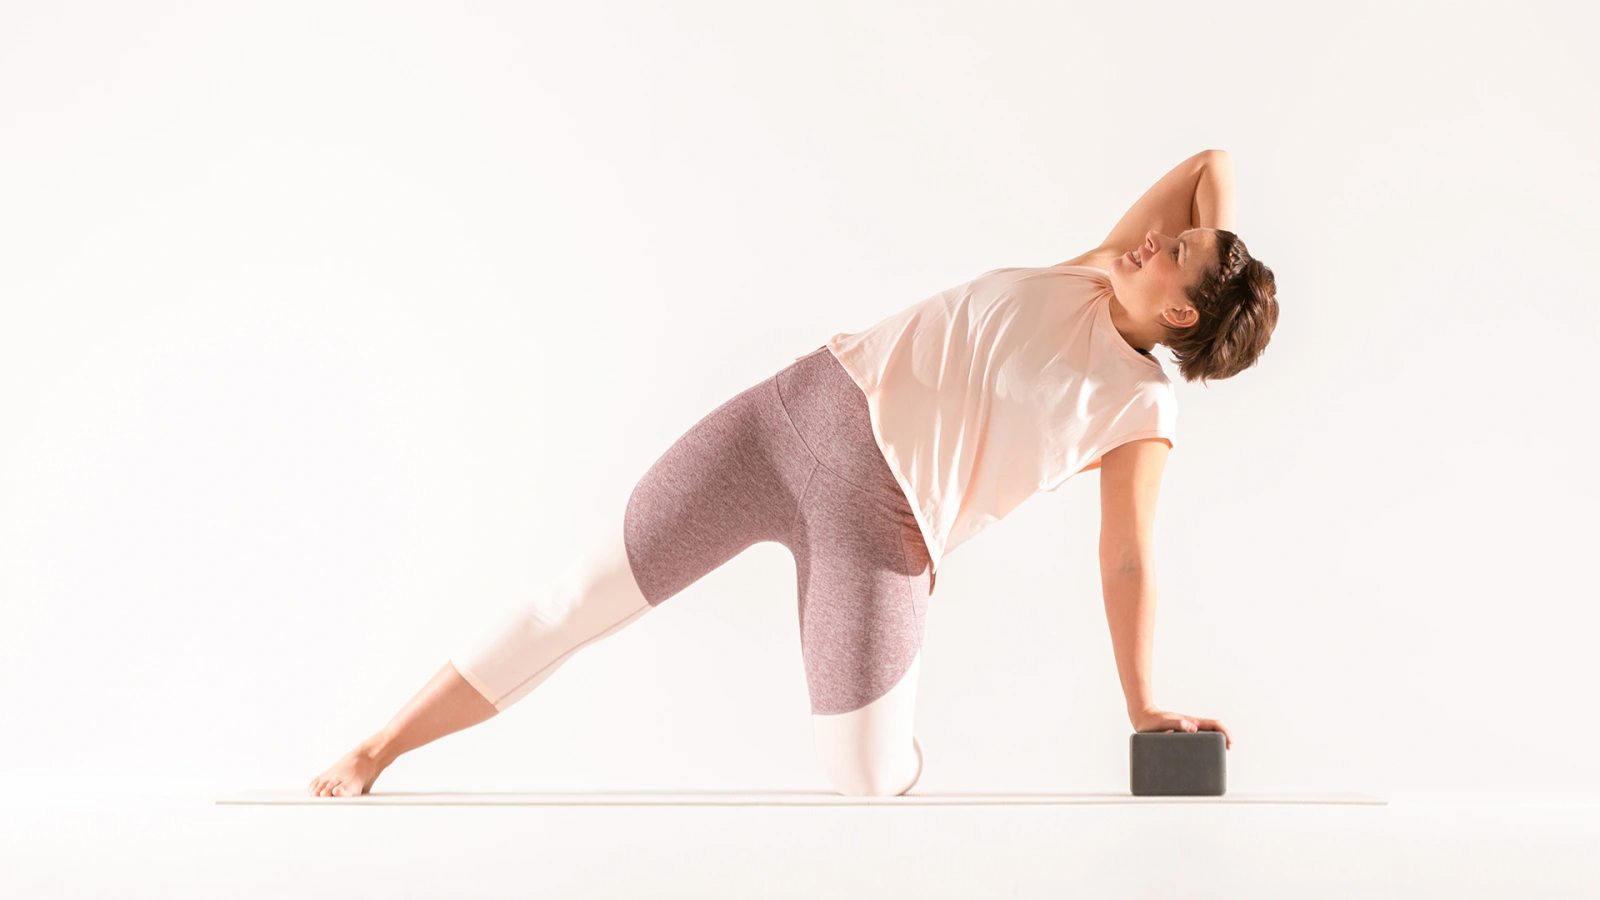 This side bending pose stretches the sides of the body while